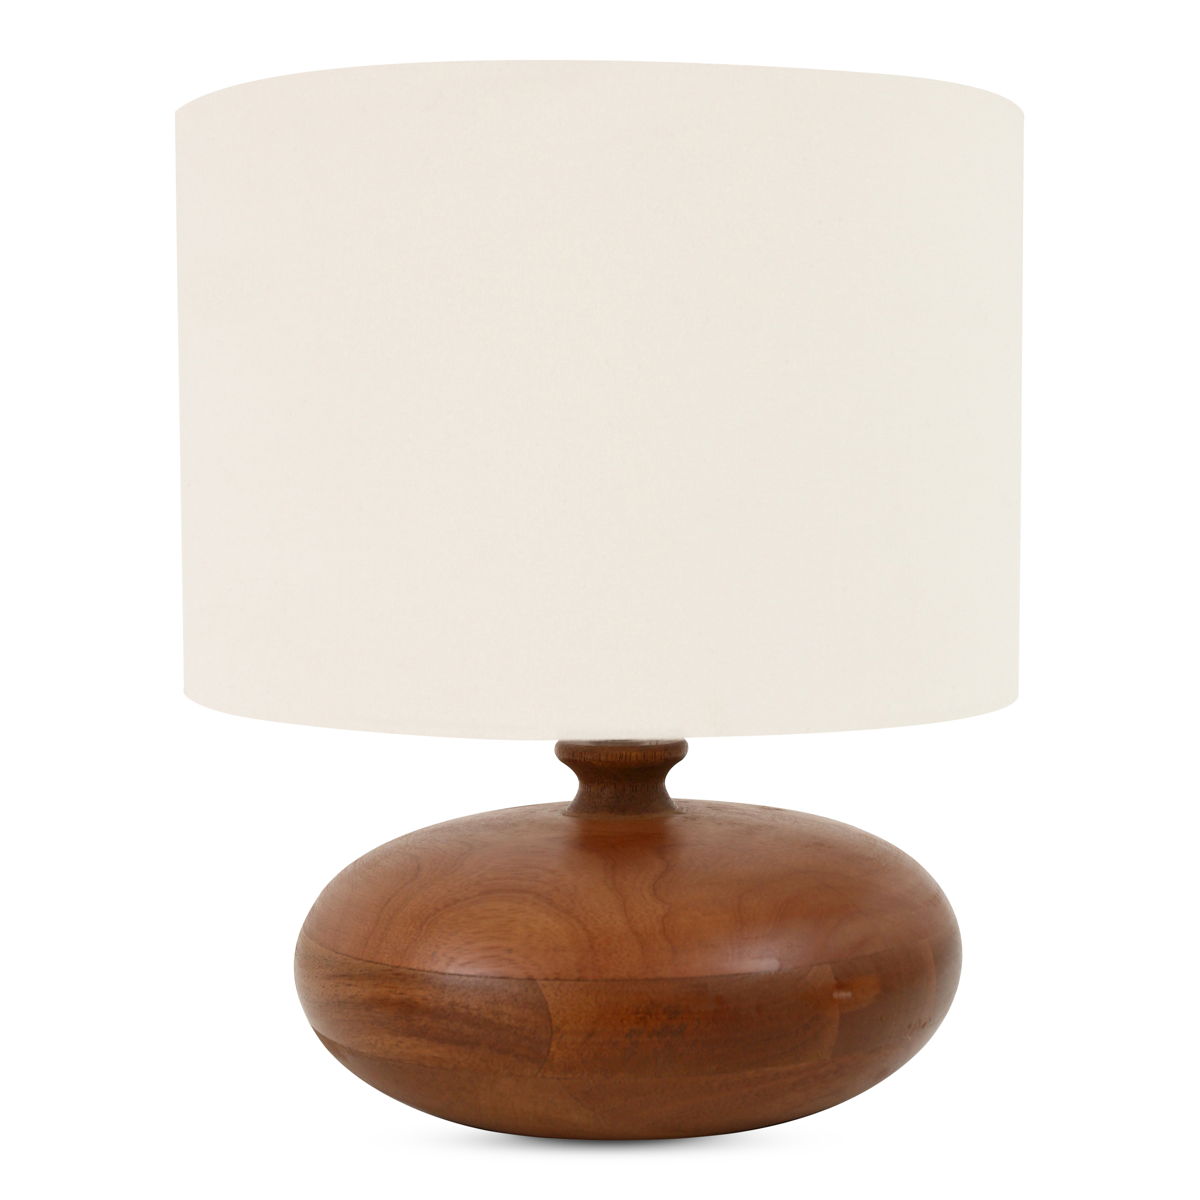 Evie - Table Lamp - Brown